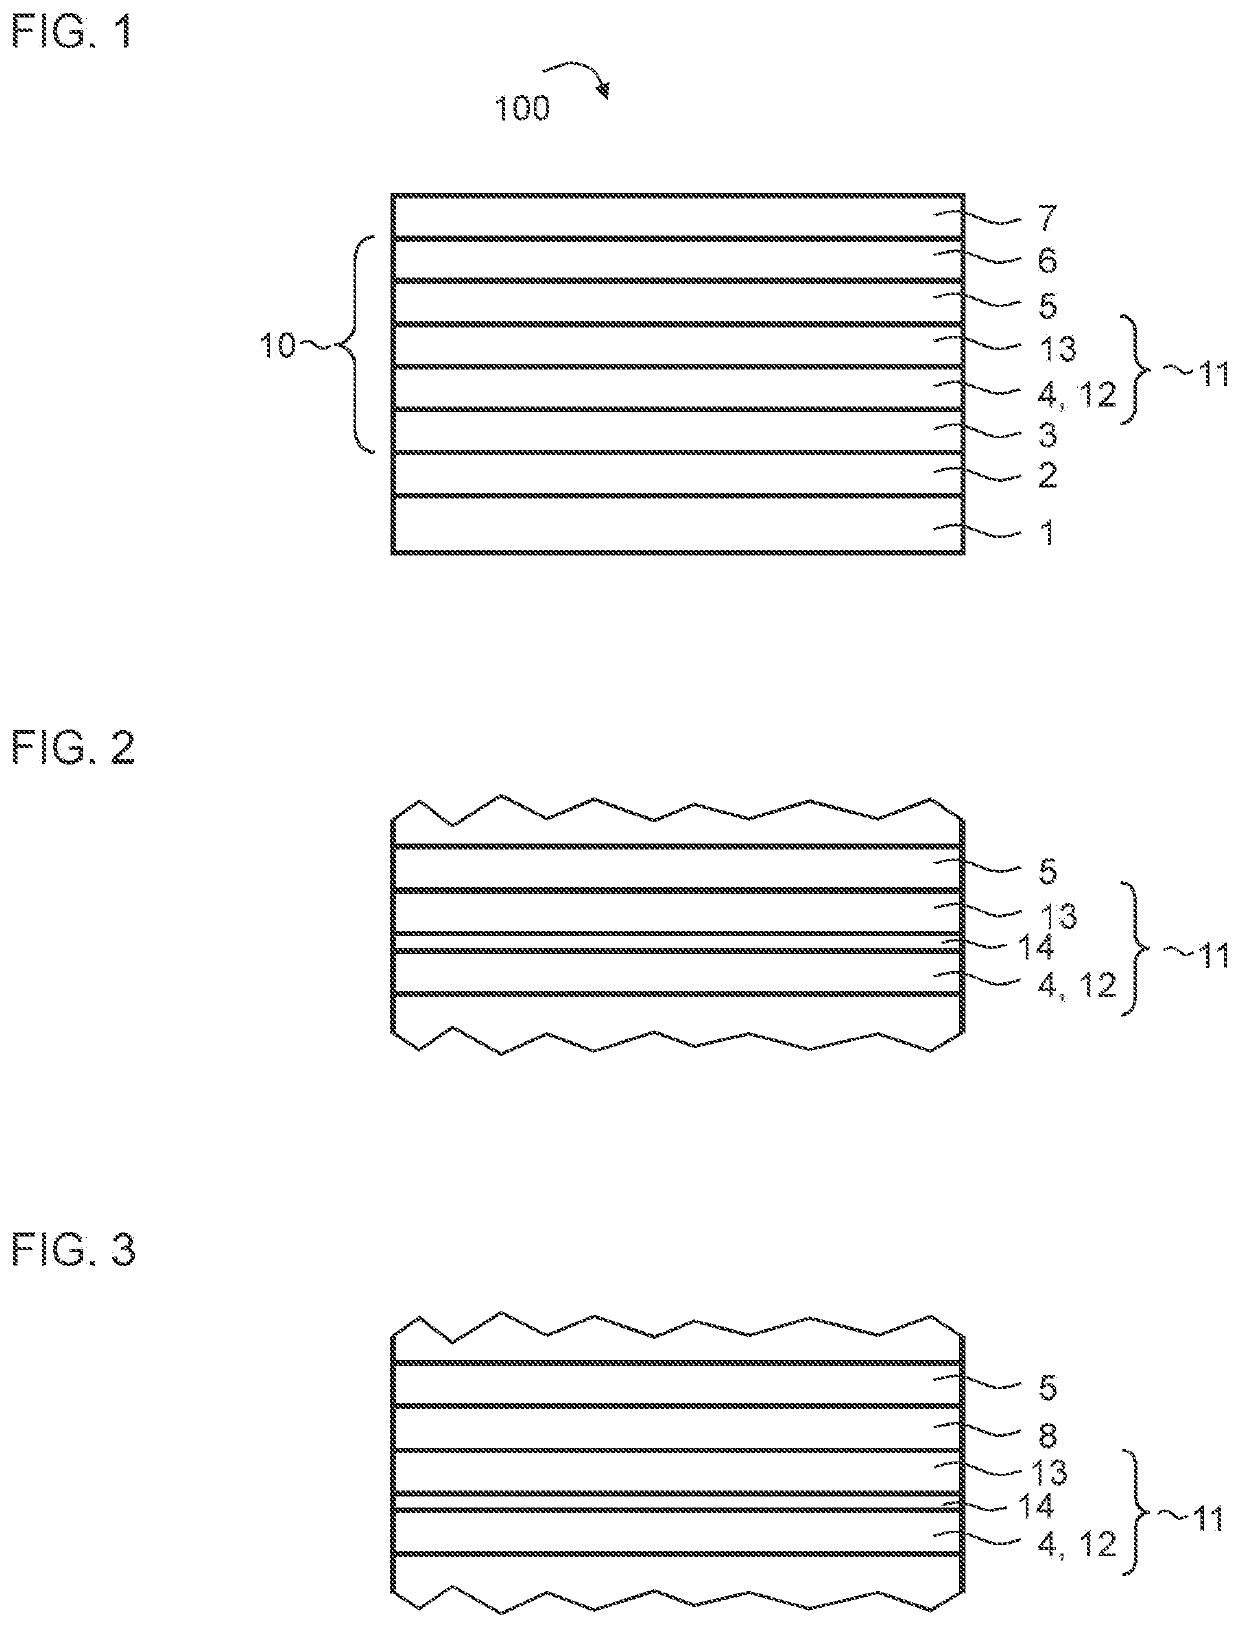 Organic light-emitting component having a light-emitting layer as part of a charge generation layer